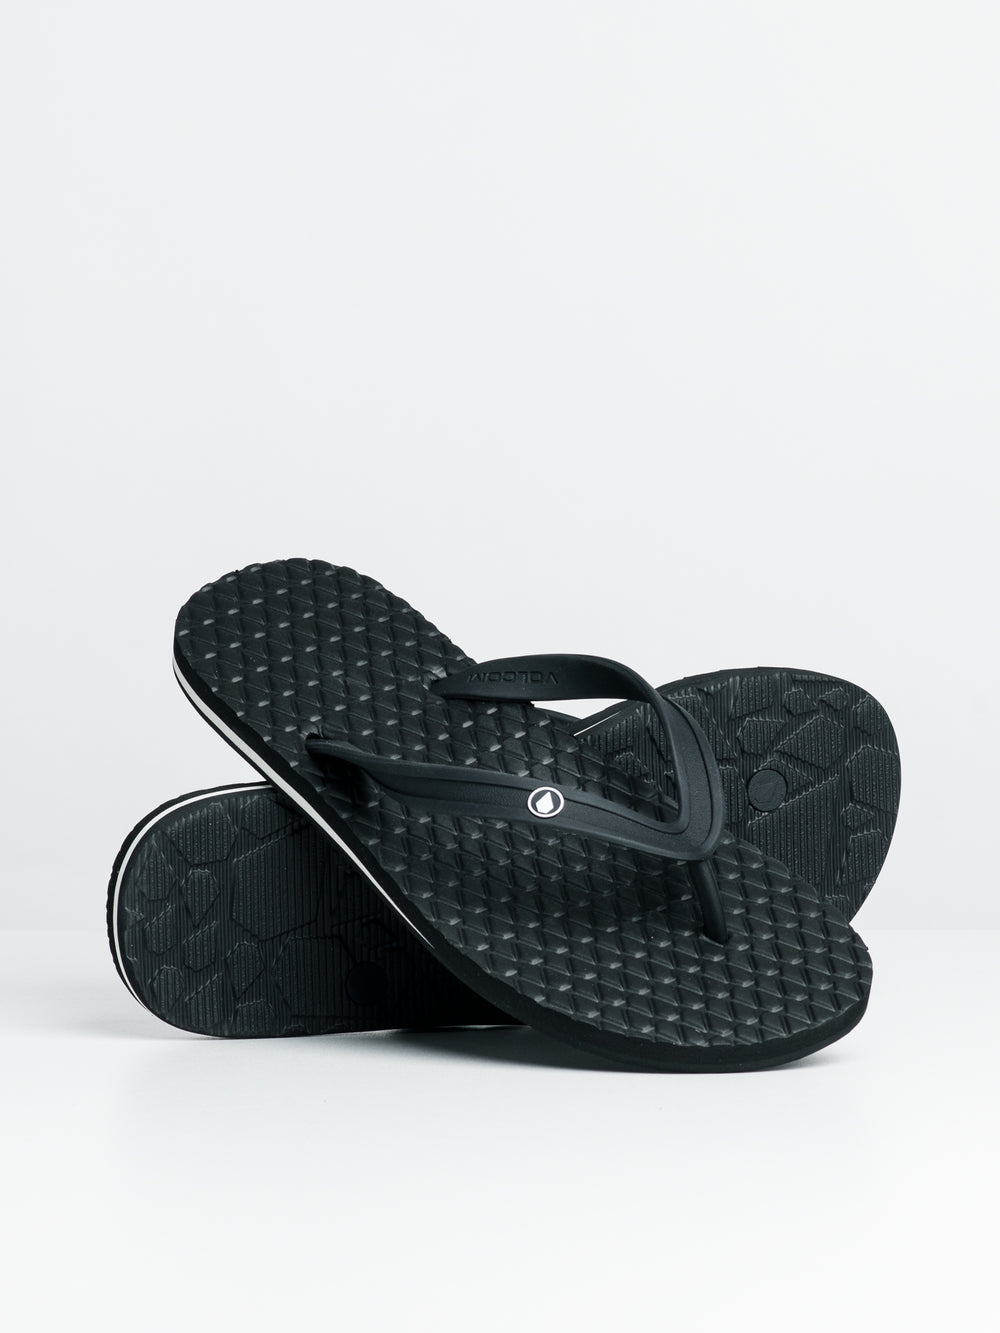 MENS VOLCOM ECO CONCOURSE SANDALS - CLEARANCE